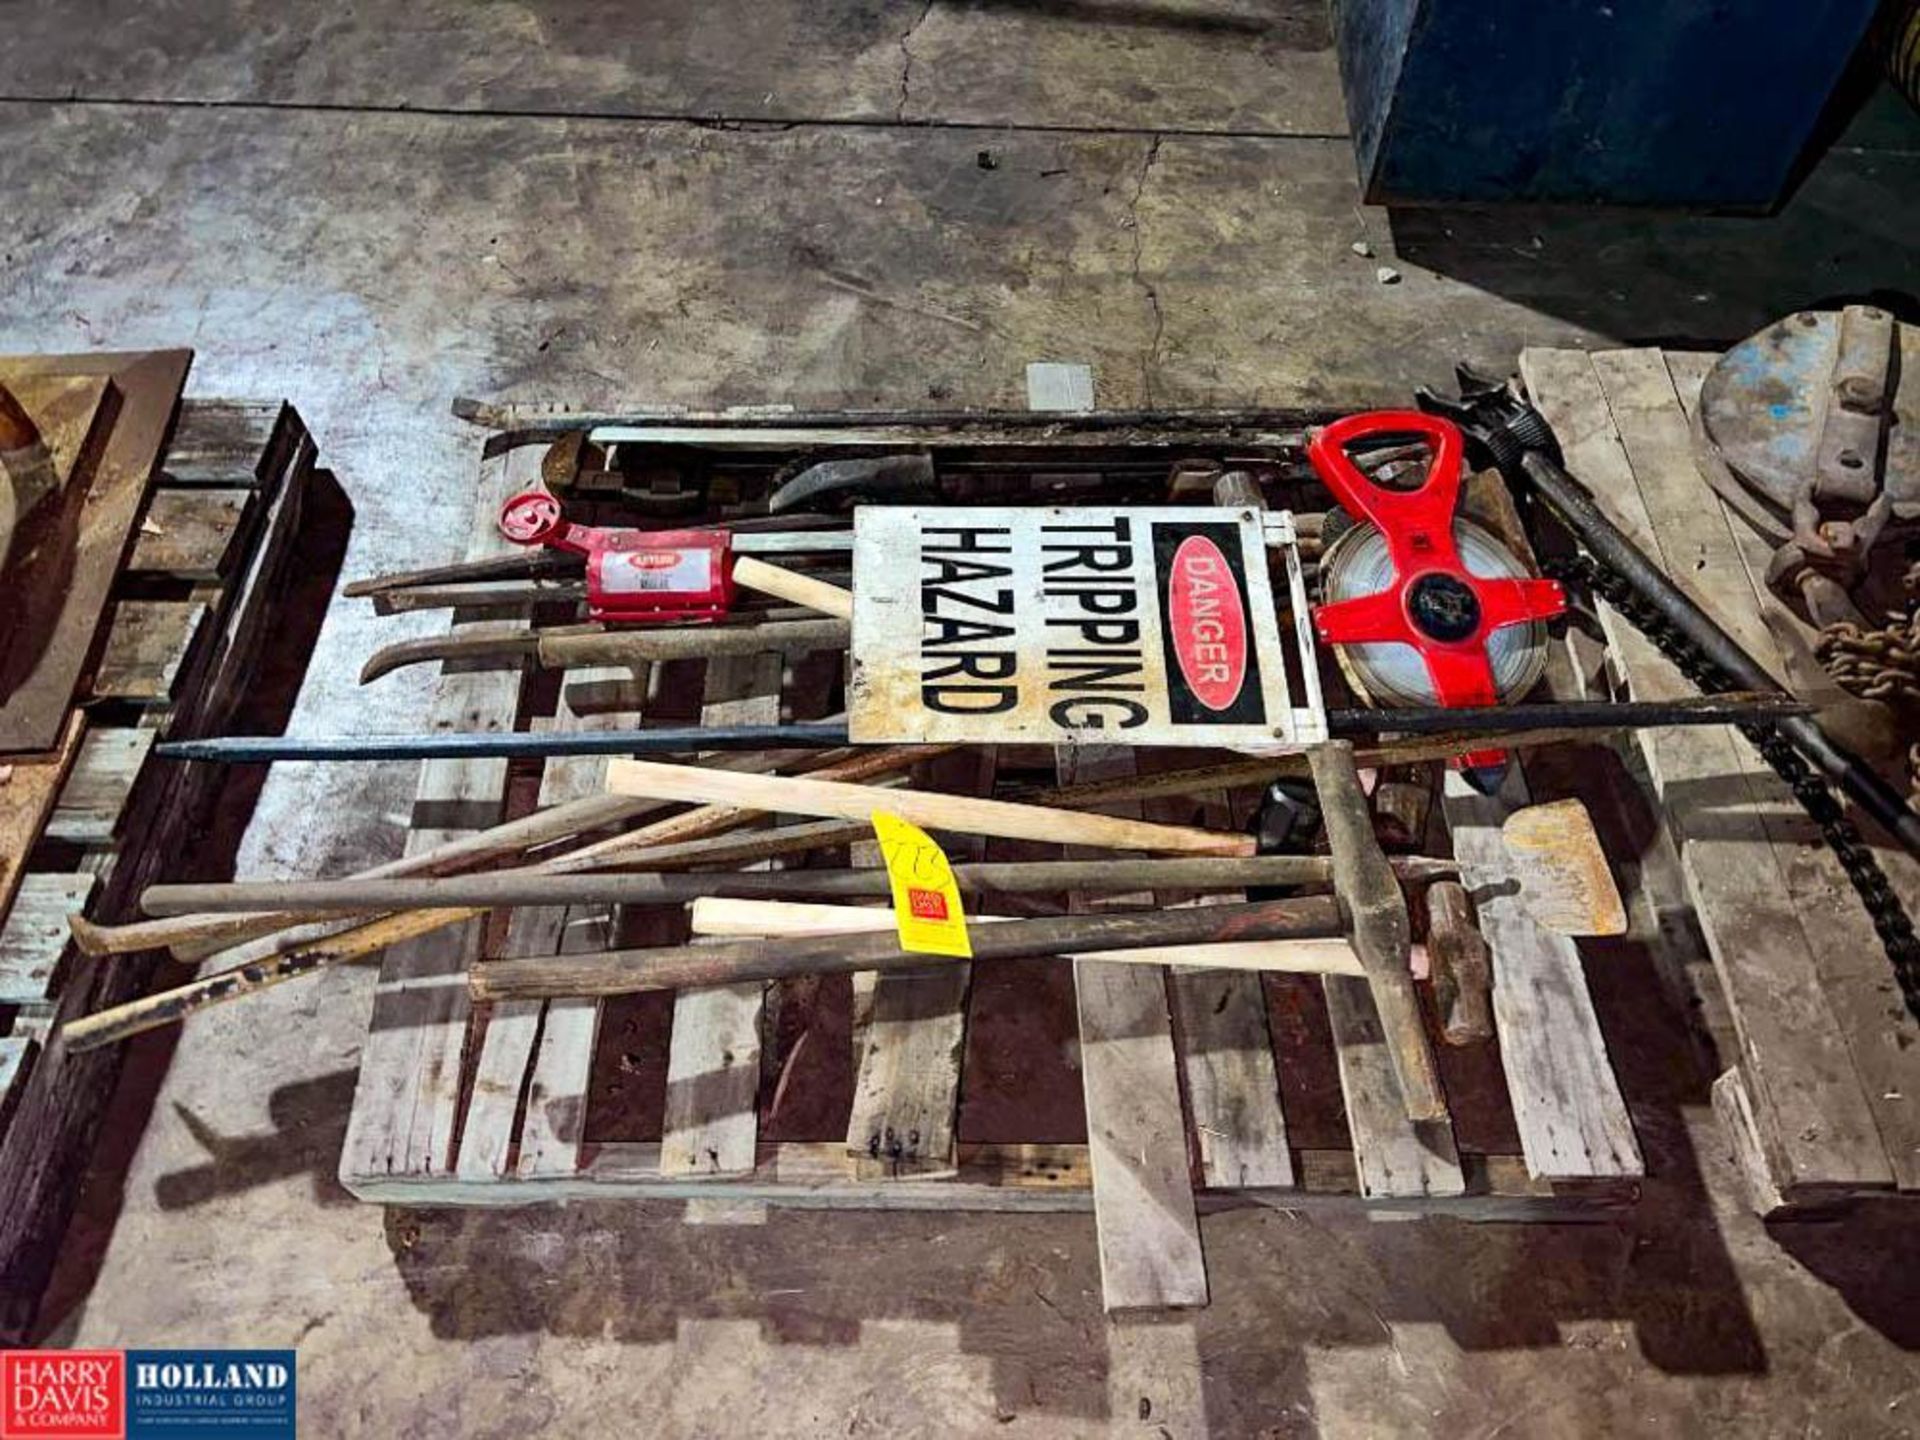 (3) Pallets with Assorted Tie Rods, Sledge Hammers, Pipe Wrenches, 300' Tape Measure and Hazard Sign